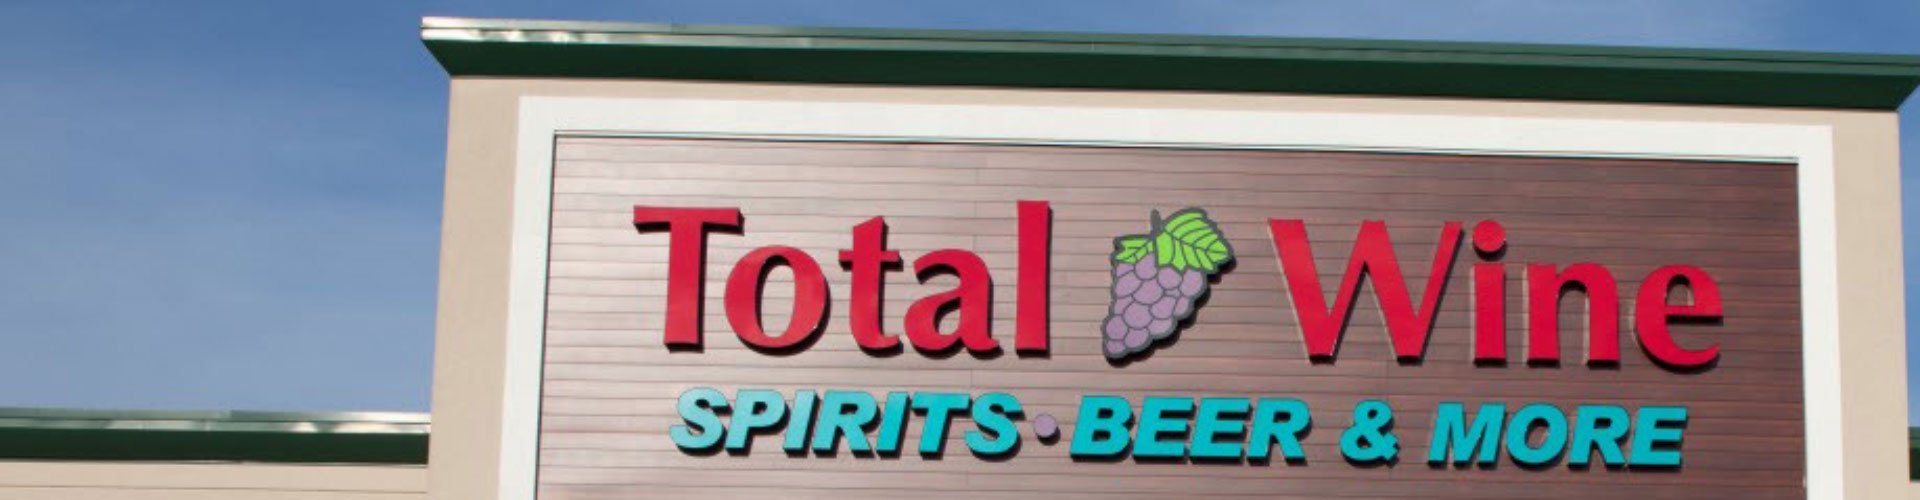 Alcohol Delivery Near Me Louisville, Kentucky | Total Wine ...